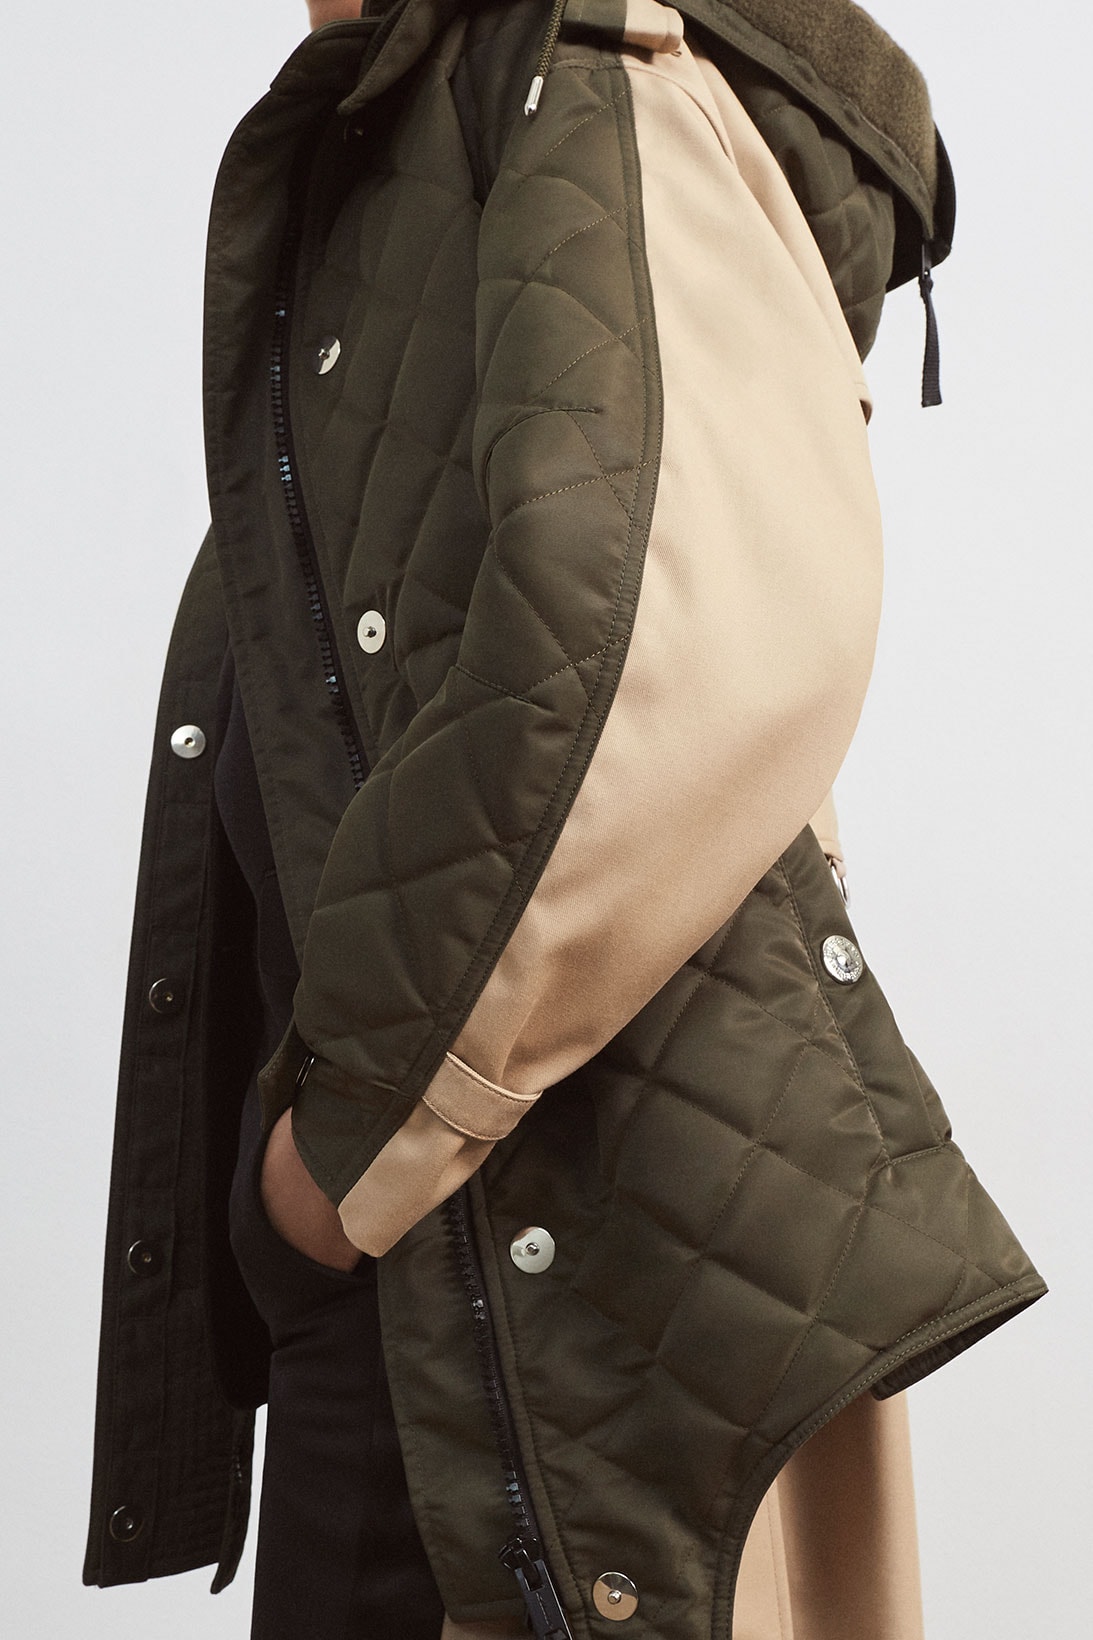 burberrys future archive capsule limited edition collection campaign khaki quilted